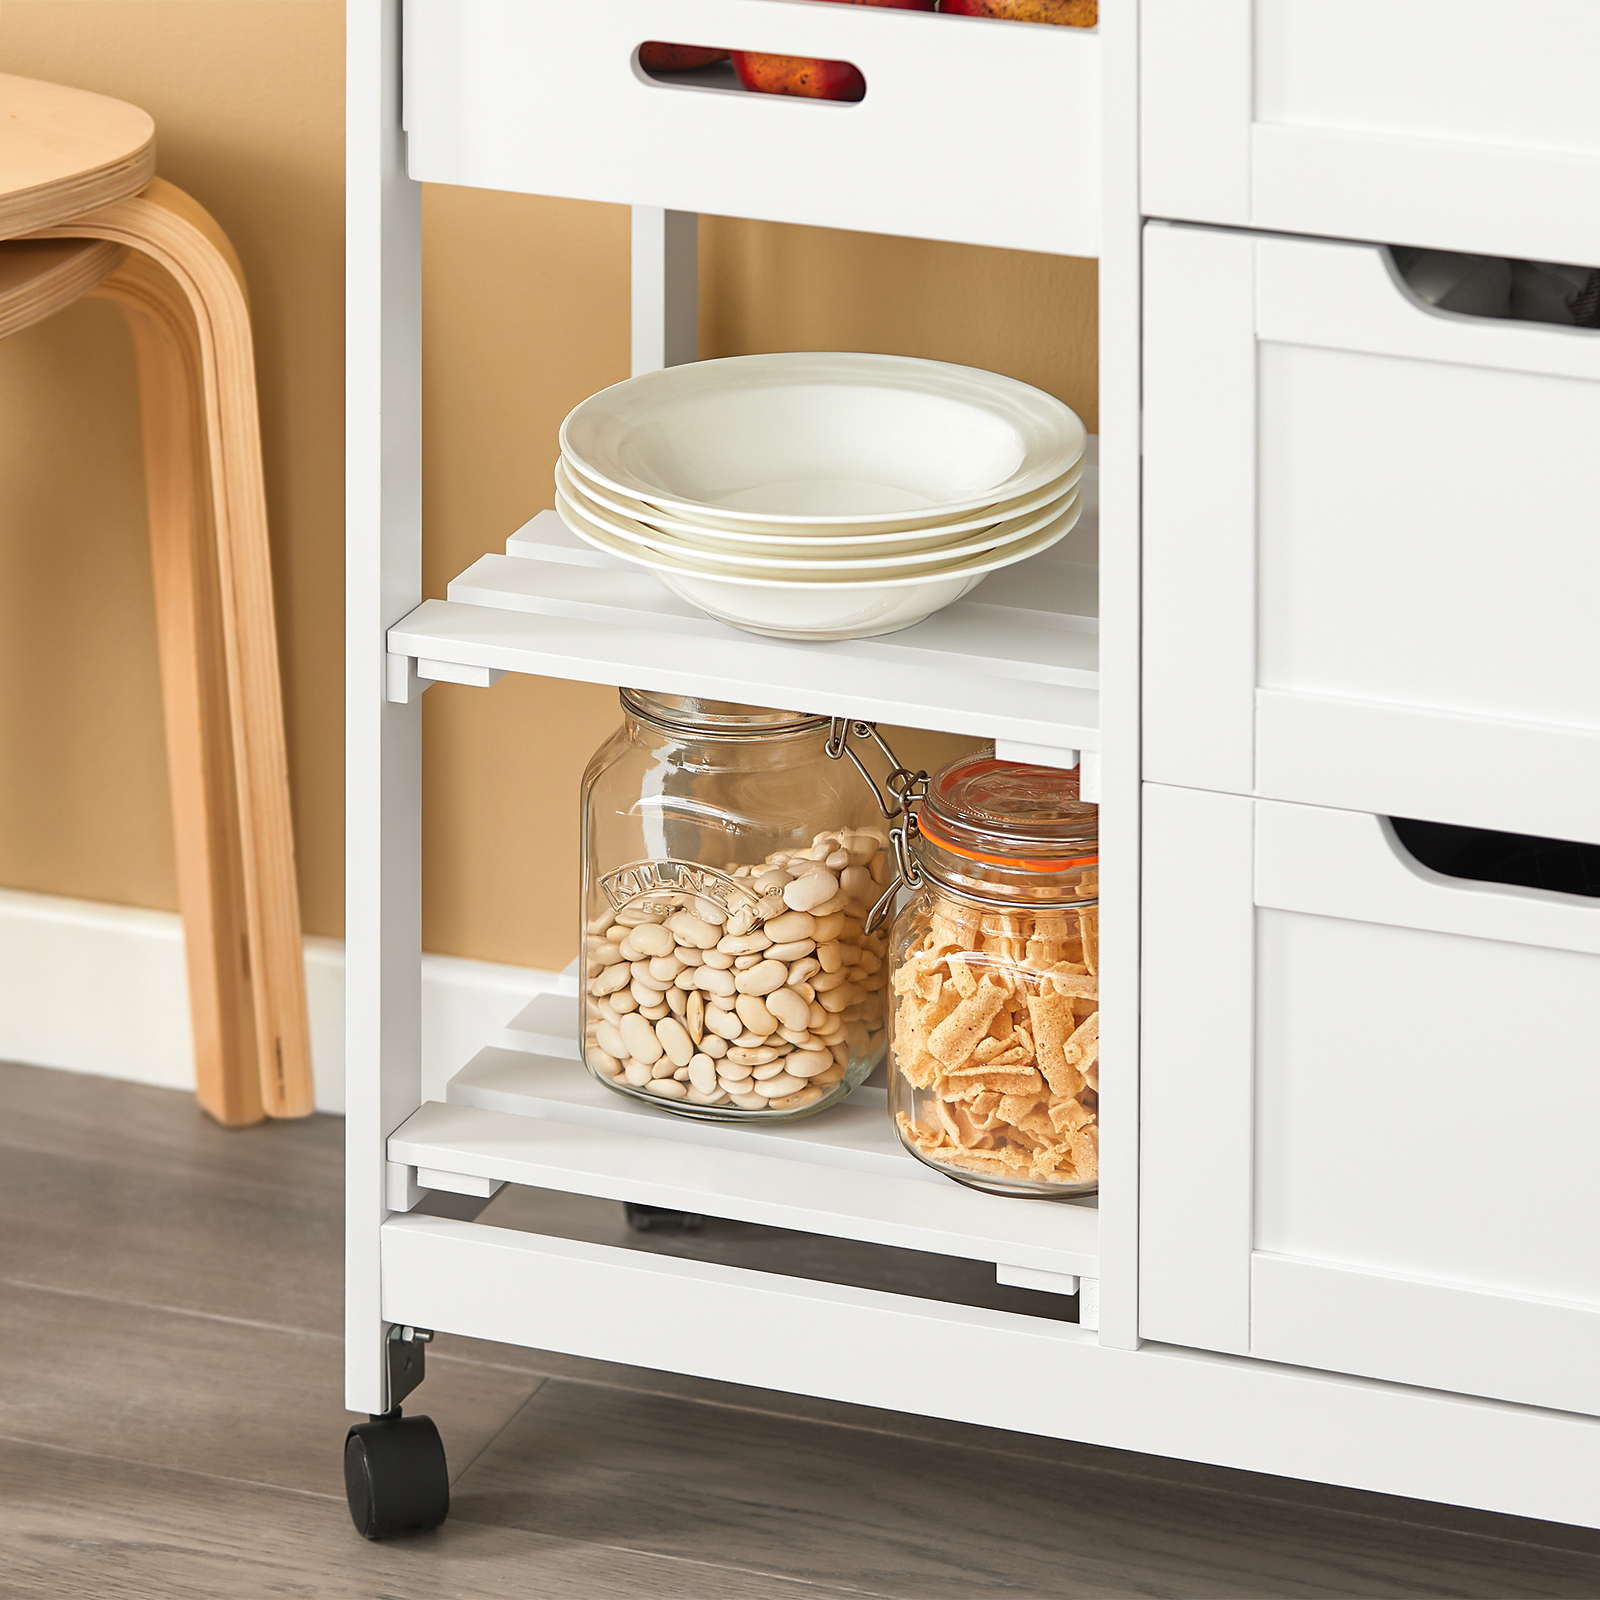 SoBuy FKW79-W,Kitchen Serving Cart with 3 Drawers and Removable Tray,Kitchen Storage Trolley,White